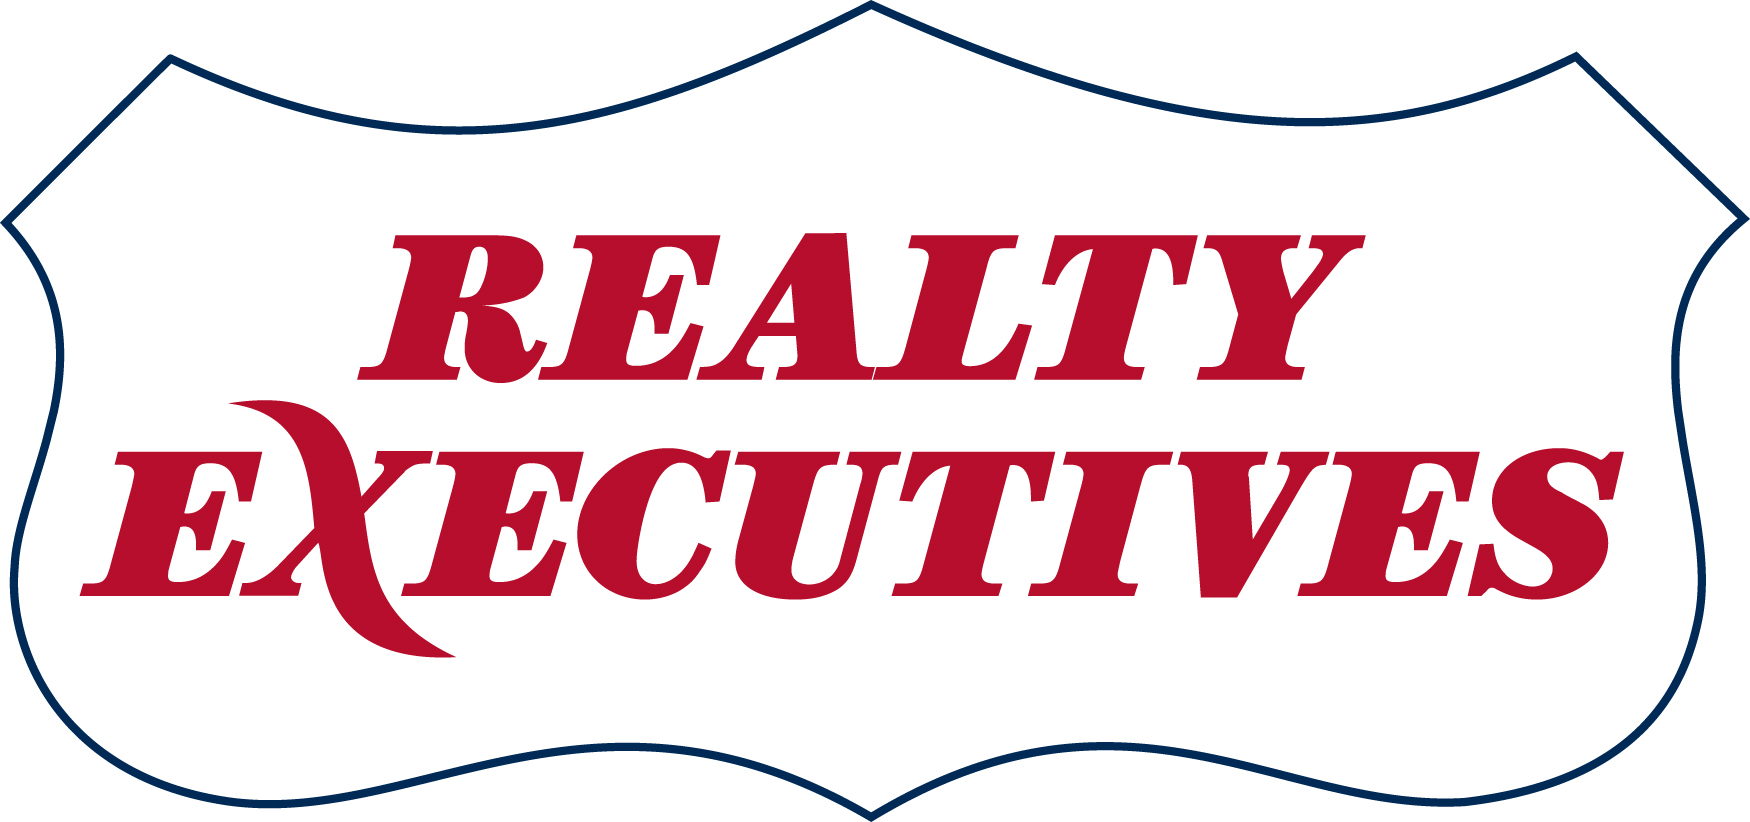 Realty Executives - Difference Makers